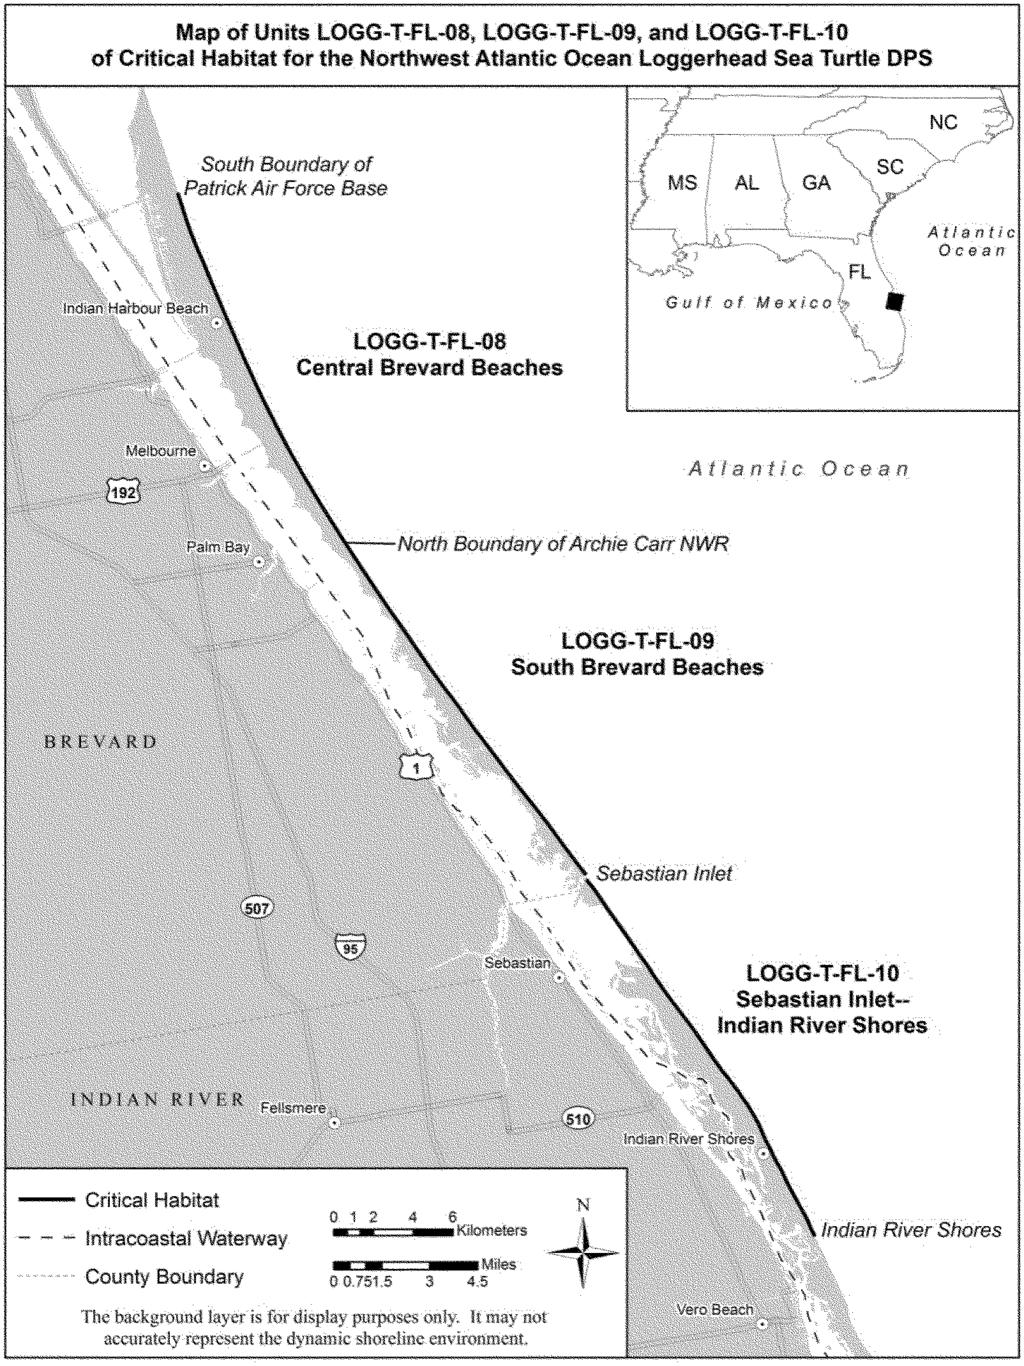 Federal Register / Vol. 78, No. 57 / Monday, March 25, 2013 / Proposed Rules 18065 Atlantic Ocean and extends from the north boundary of Archie Carr NWR to Sebastian Inlet.